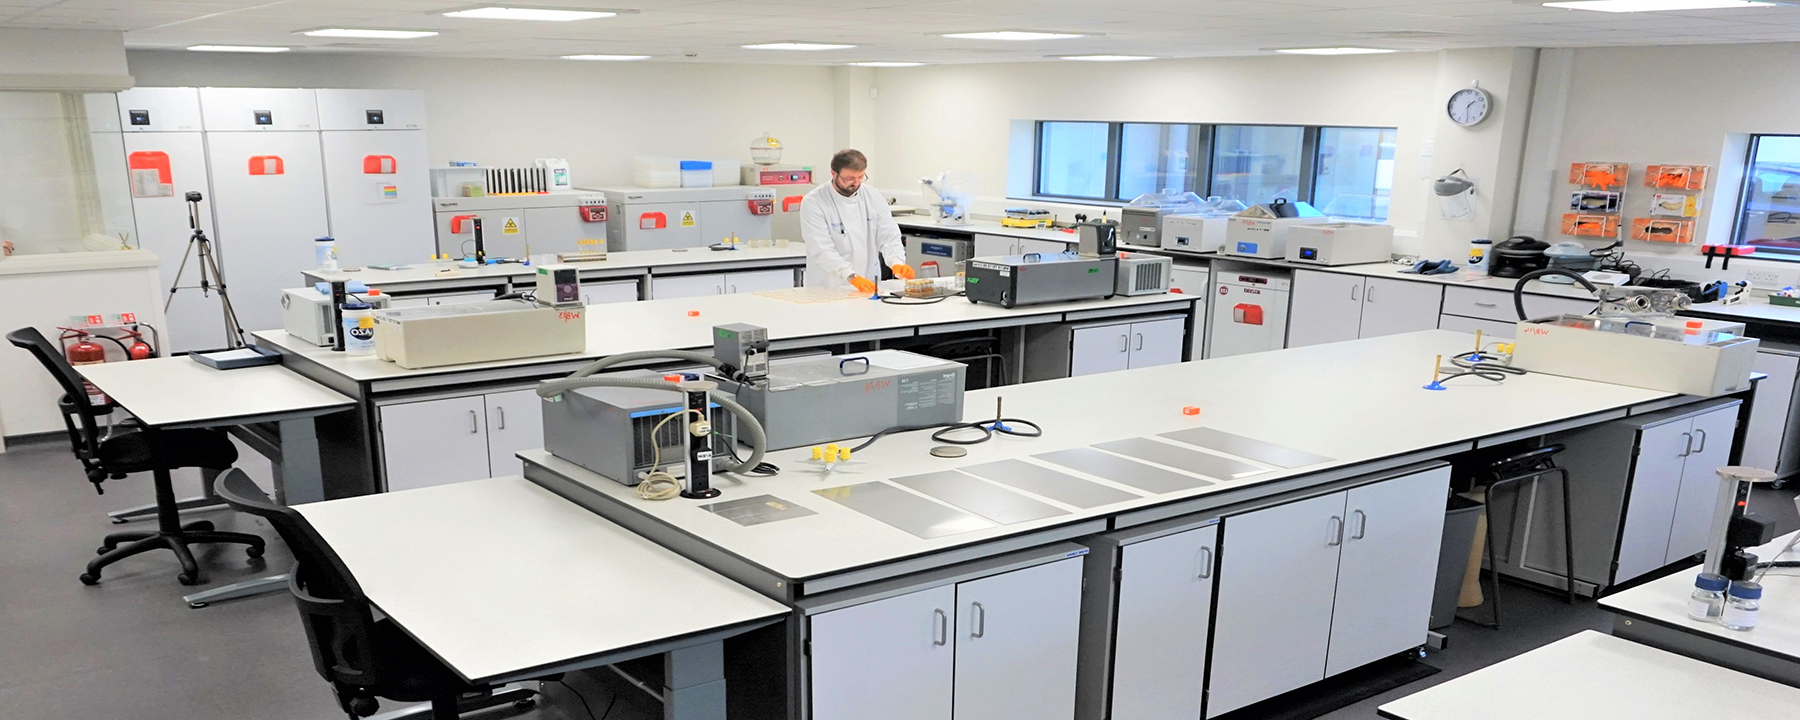 Evans Vanodine International expand their facilities Including New Microbiology, QC and R&D Laboratories.